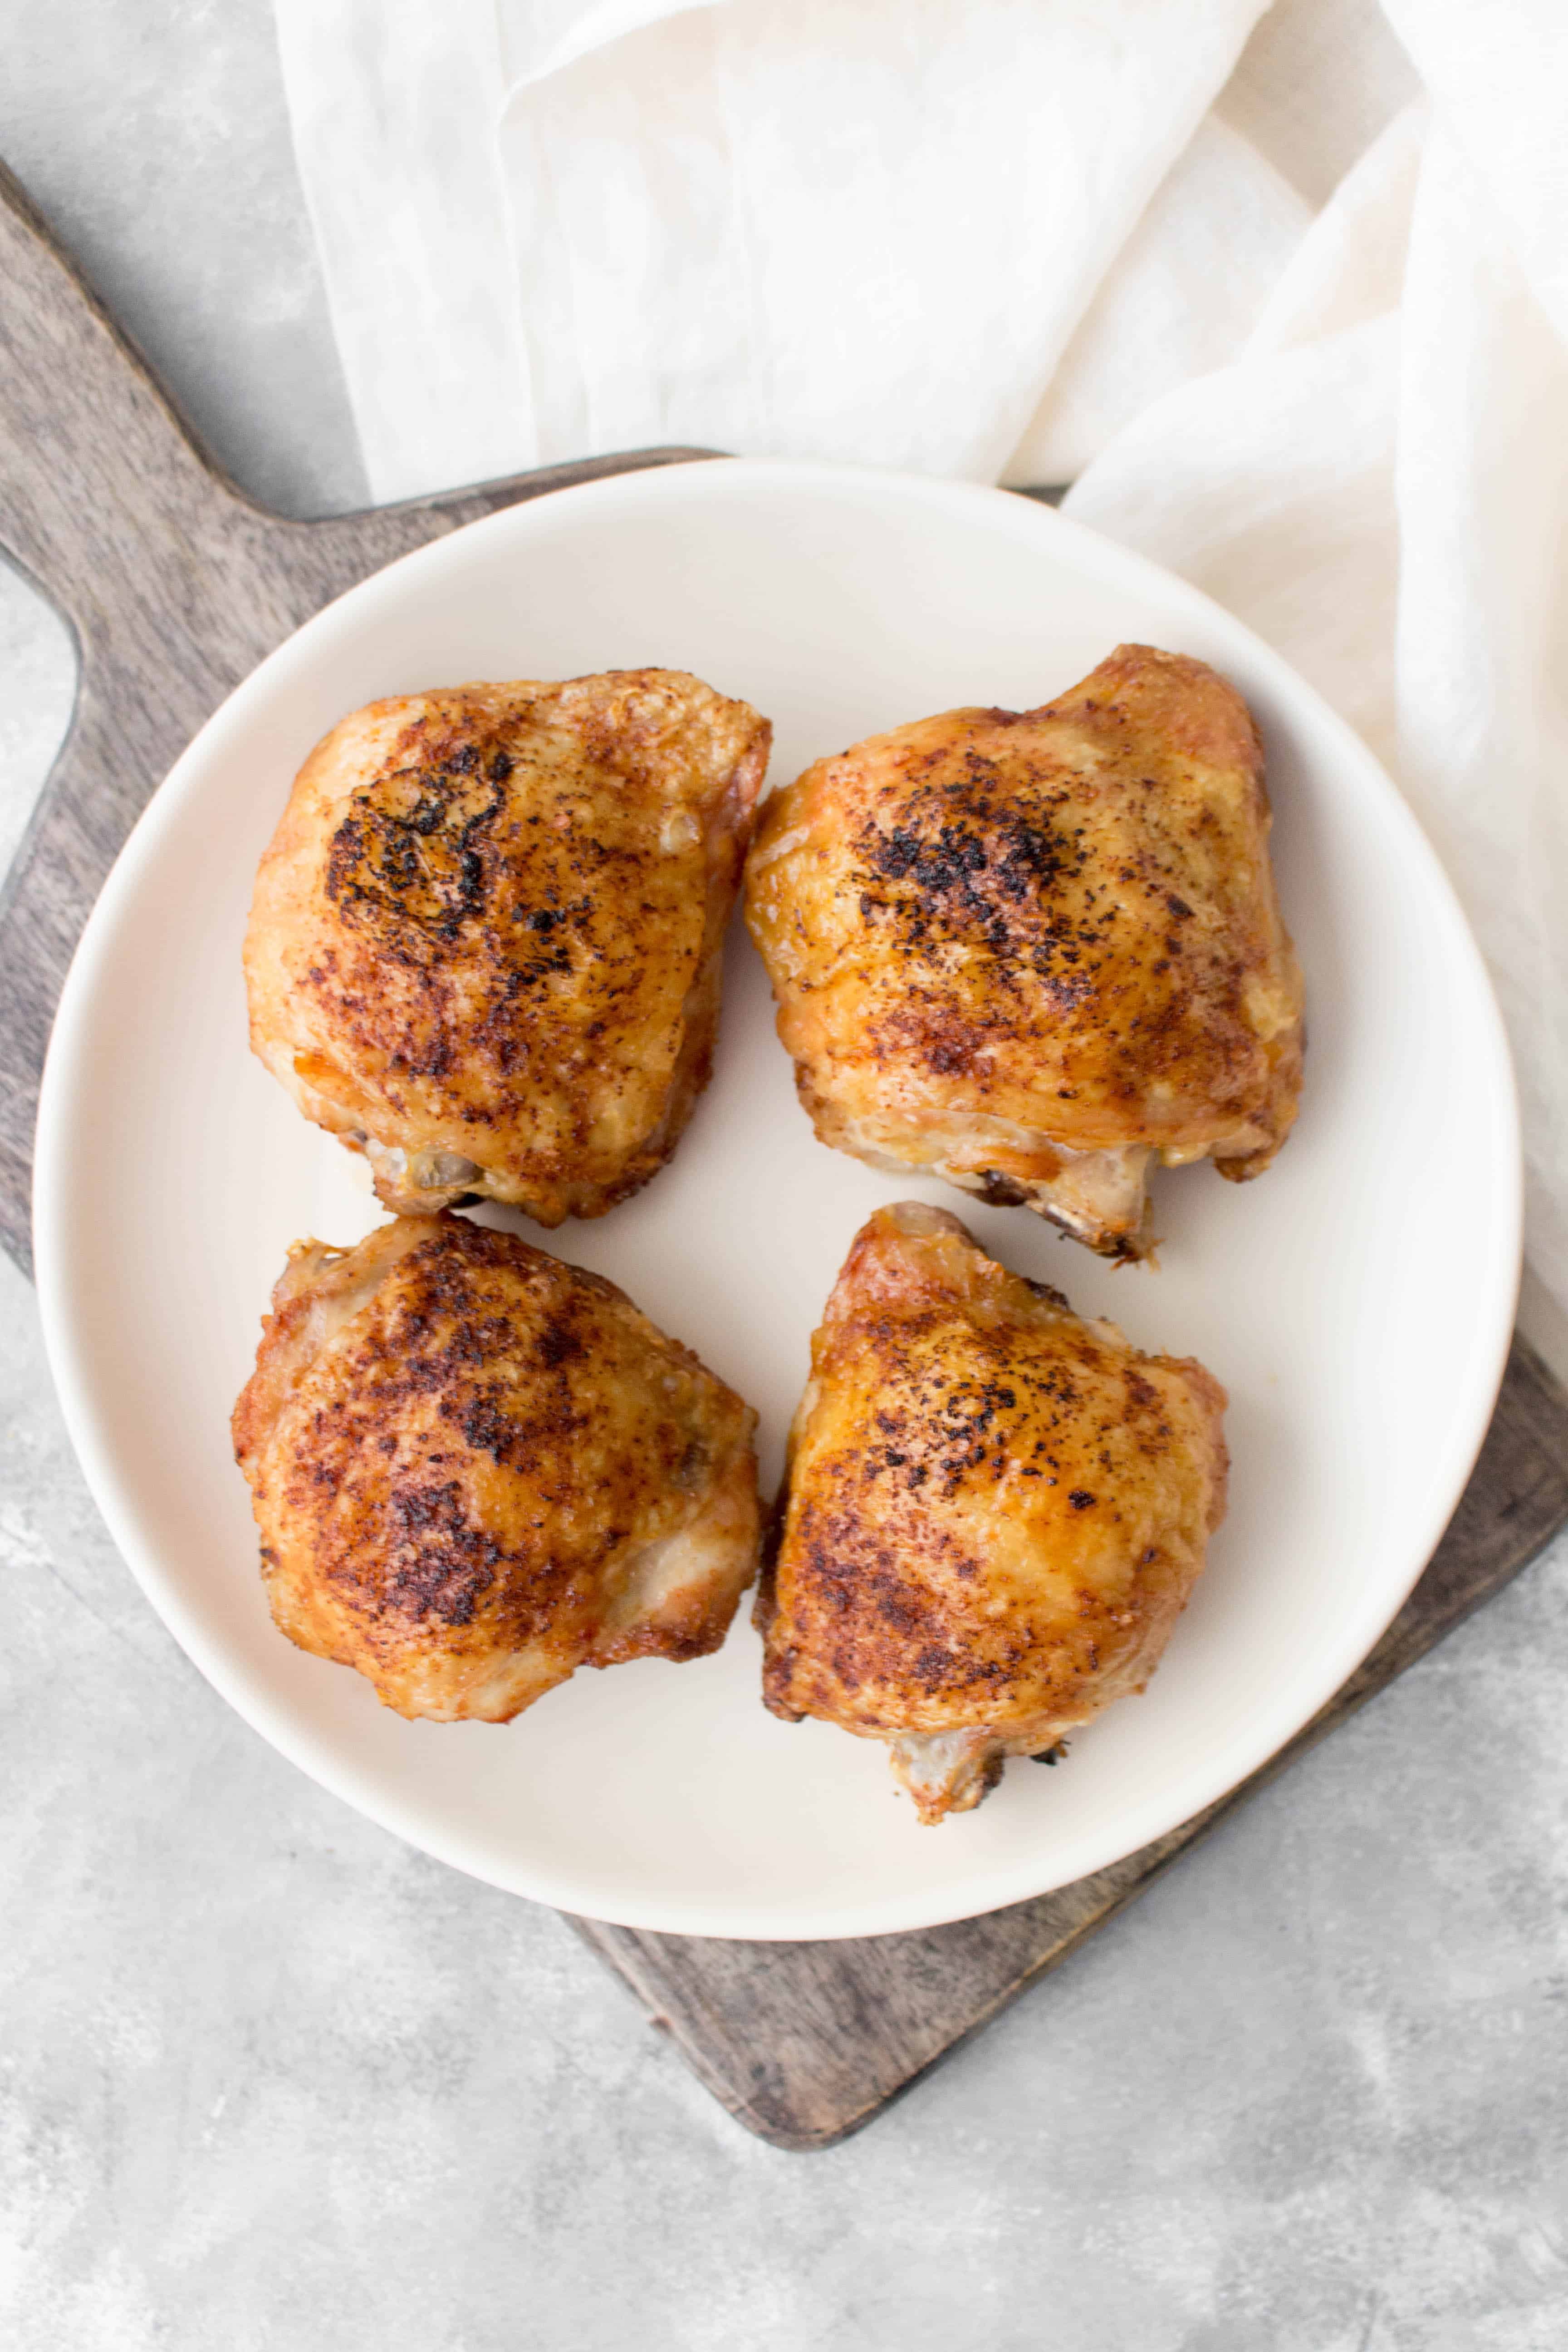 Want to how to make crispy chicken thighs in your air fryer? Here is my basic air fryer chicken thighs recipe that takes 25 minutes to make!